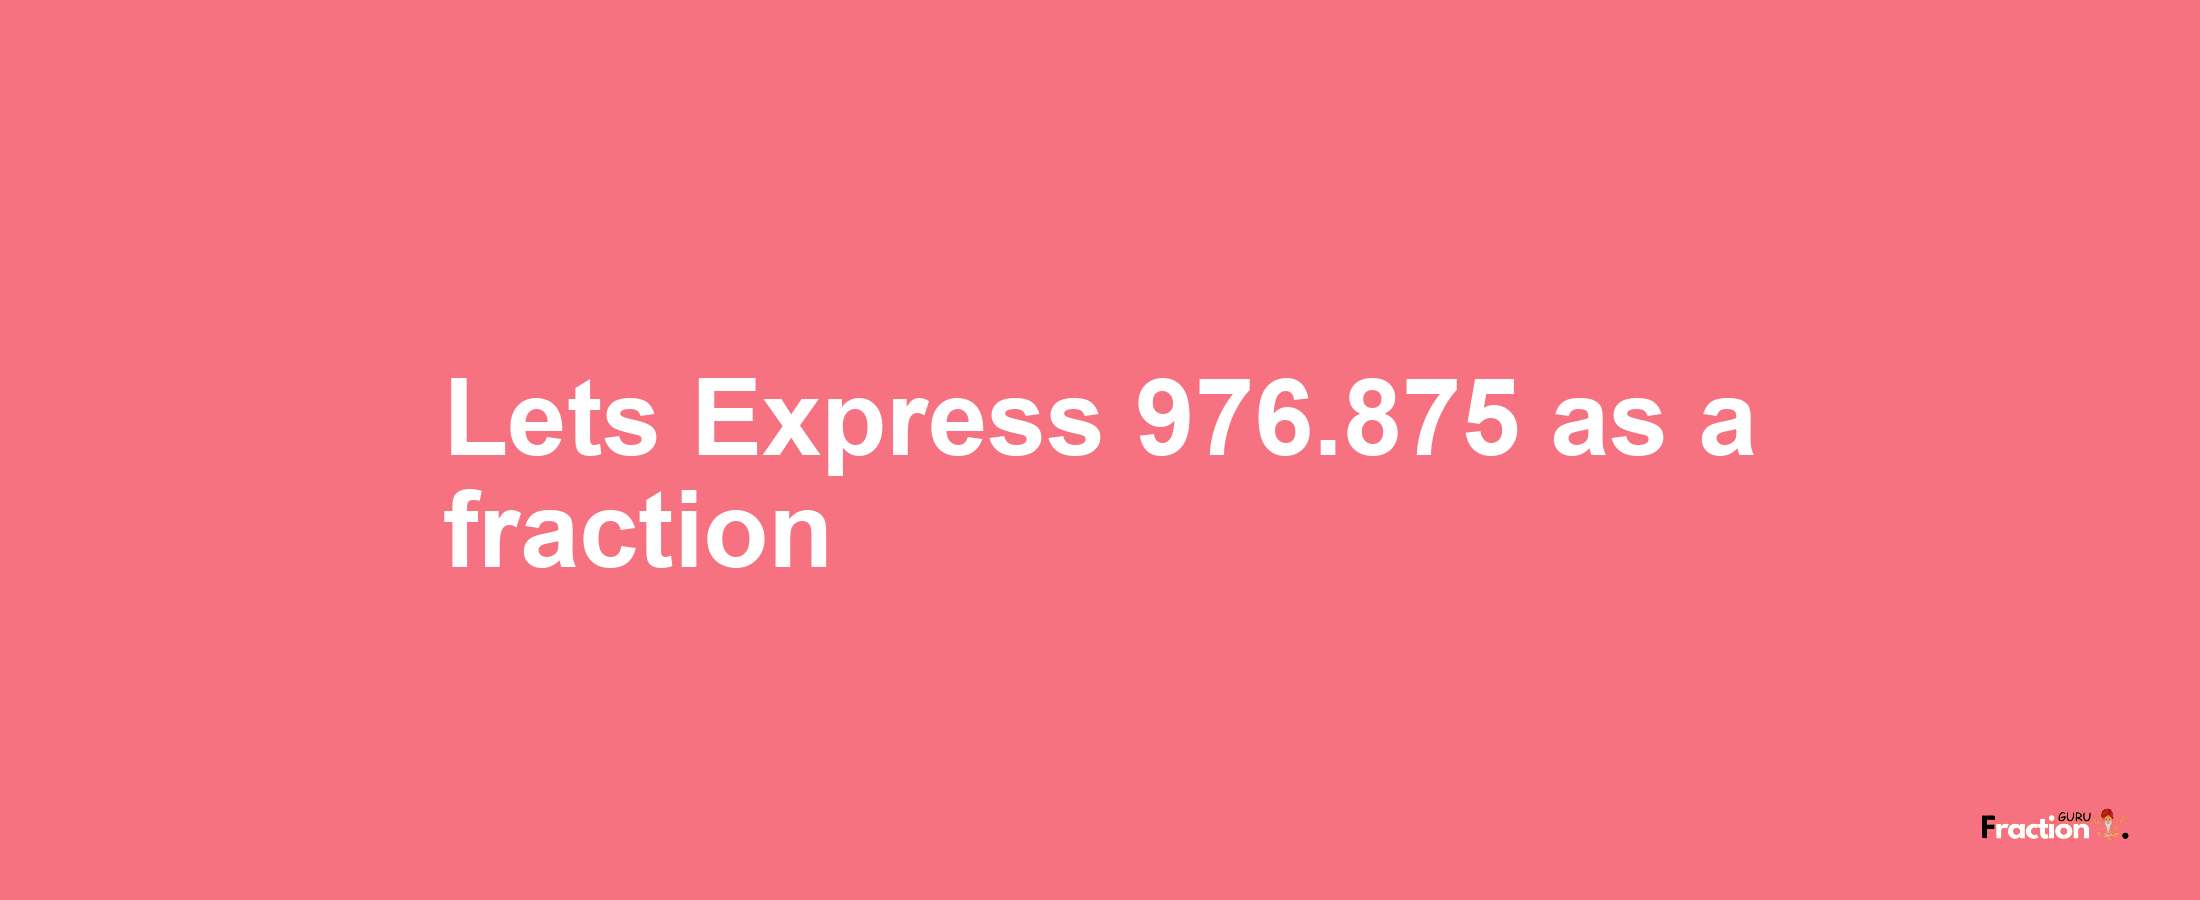 Lets Express 976.875 as afraction